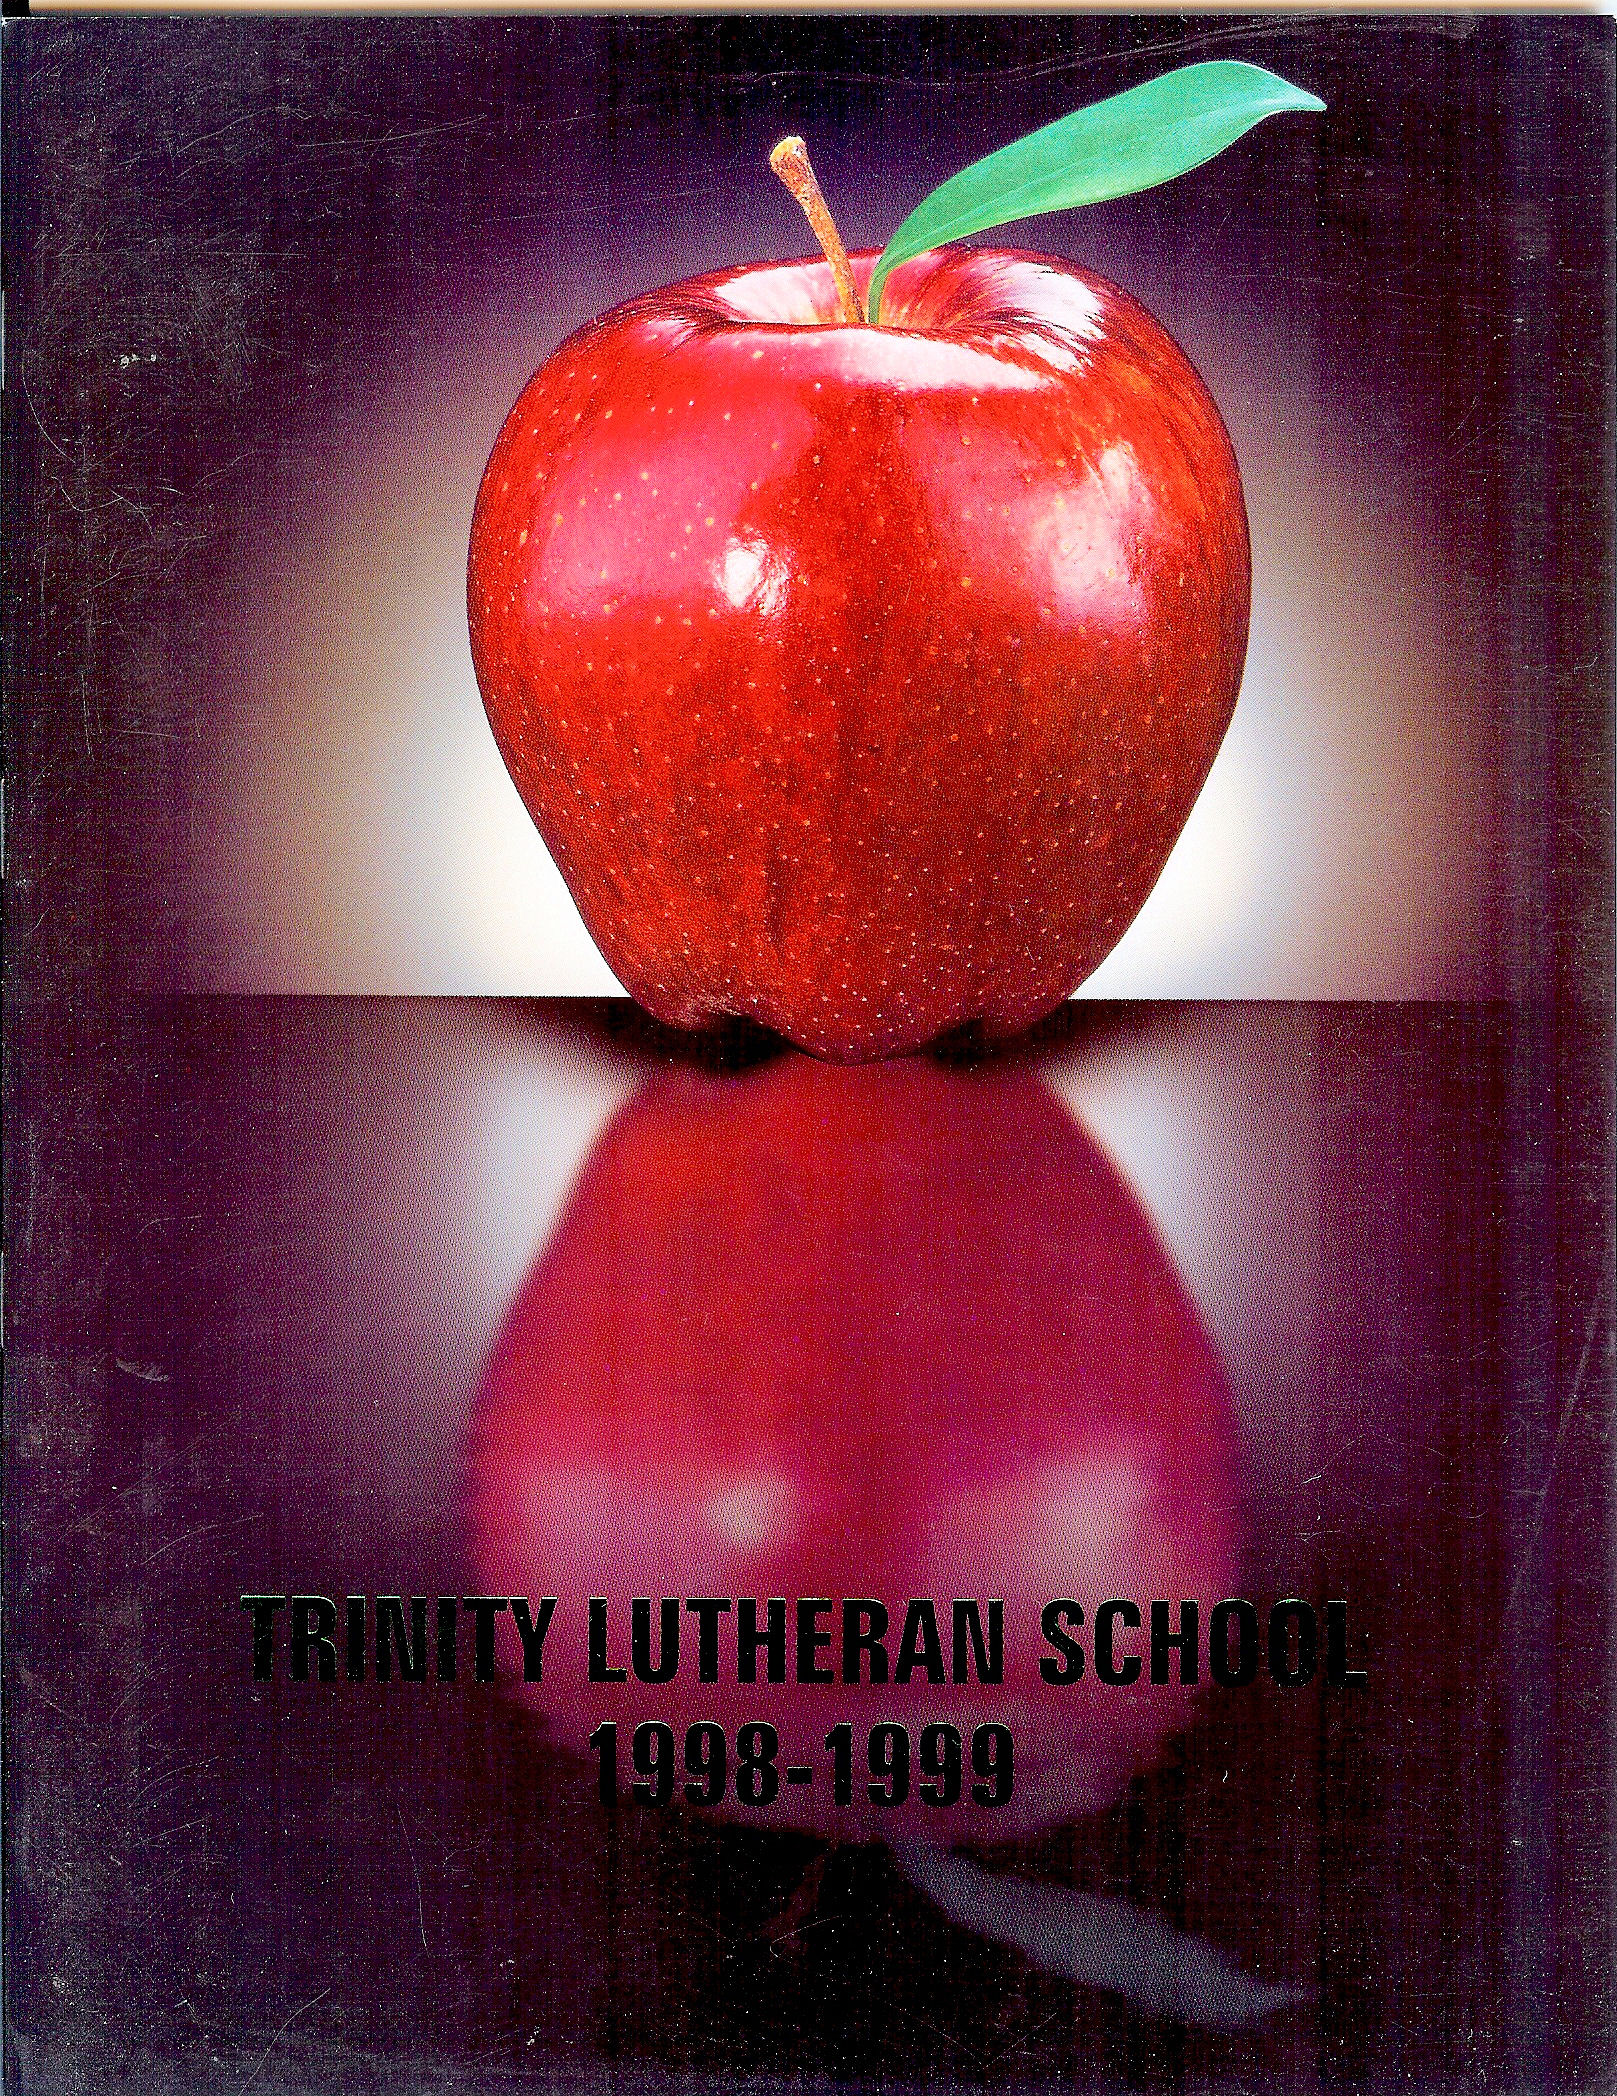 98 - 99 Yearbook Cover